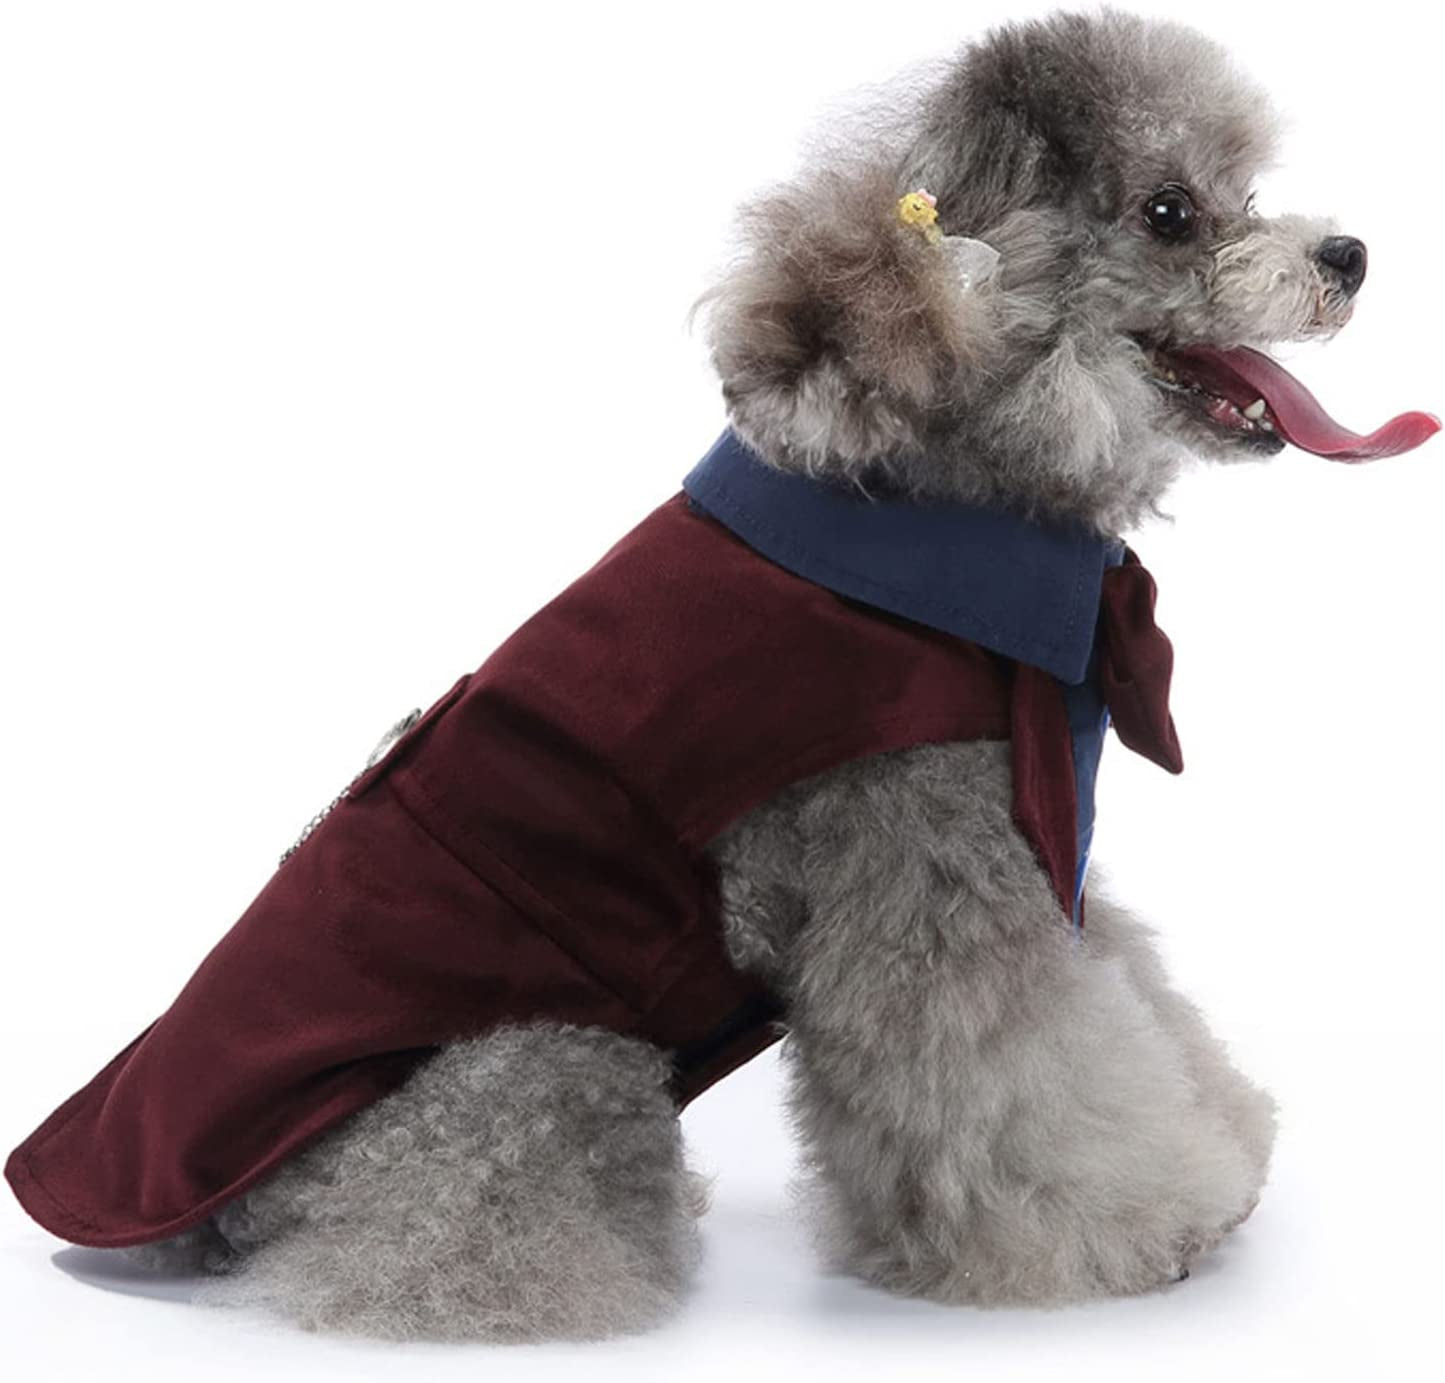 Pet Formal Clothes, Fashionable Exquisite Stitching Retro Cloth Button Humanized Design Dog Bow Tie Costume Polyester for Party (S) Animals & Pet Supplies > Pet Supplies > Dog Supplies > Dog Apparel UBEF   